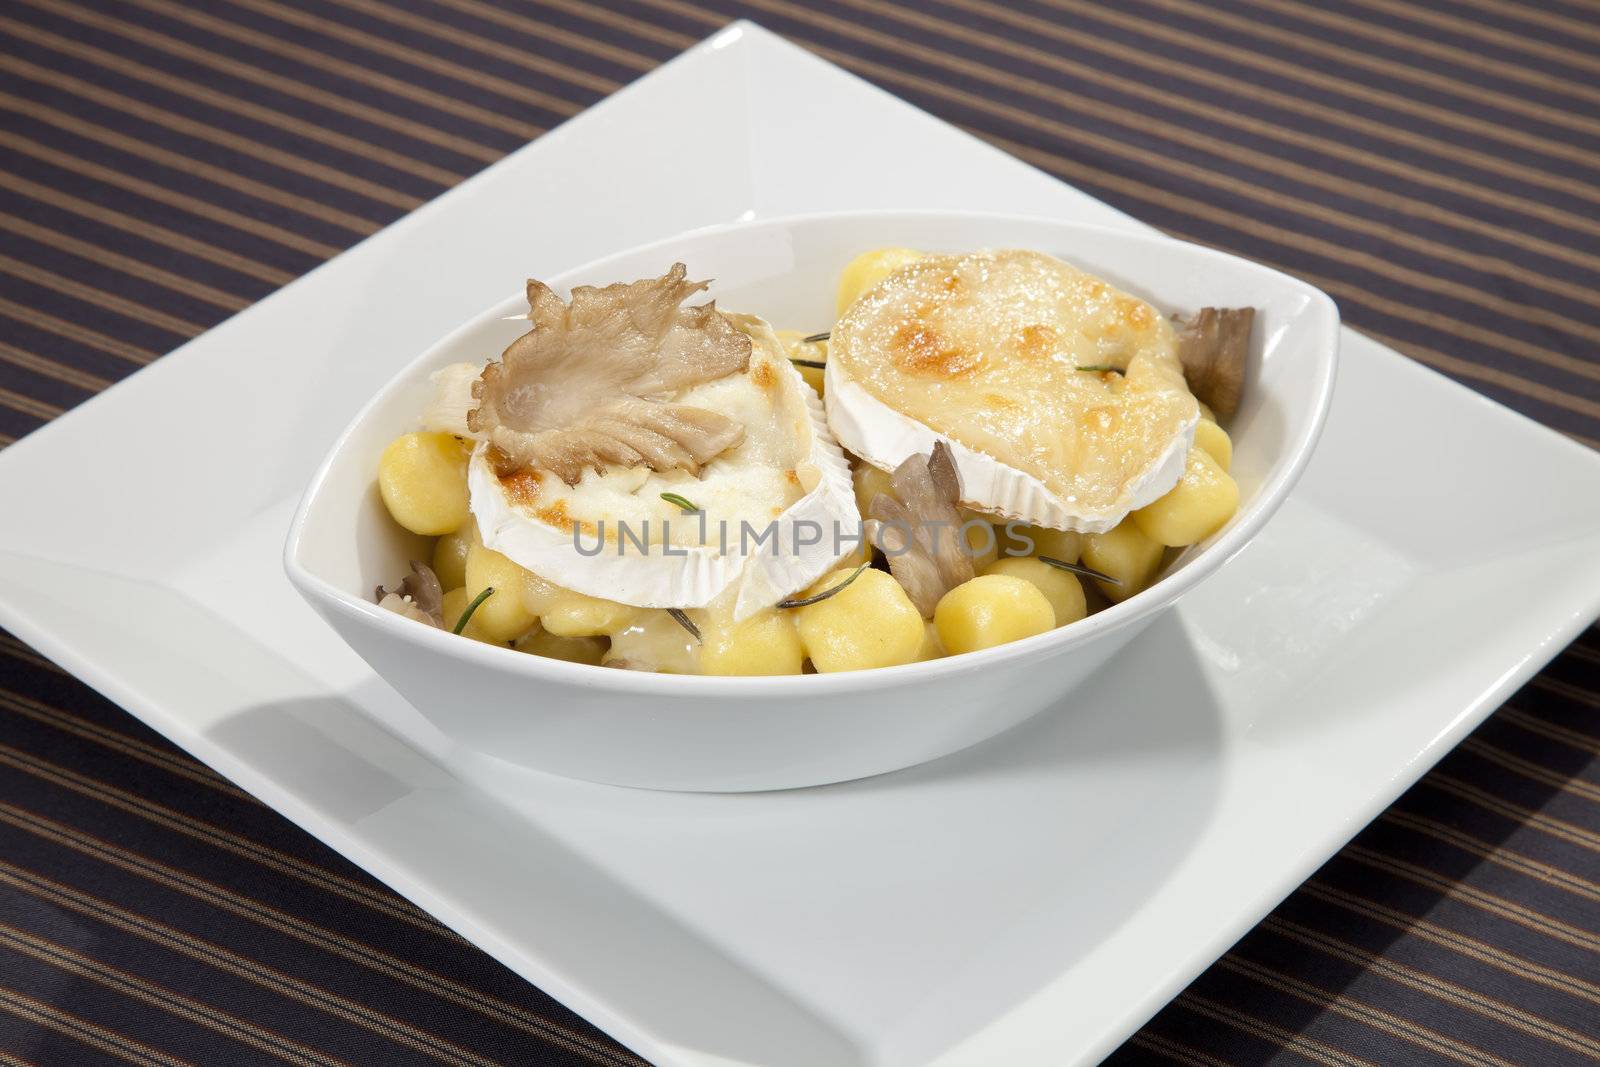 Grilled camembert cheese with the gnochi and mushrooms by hanusst